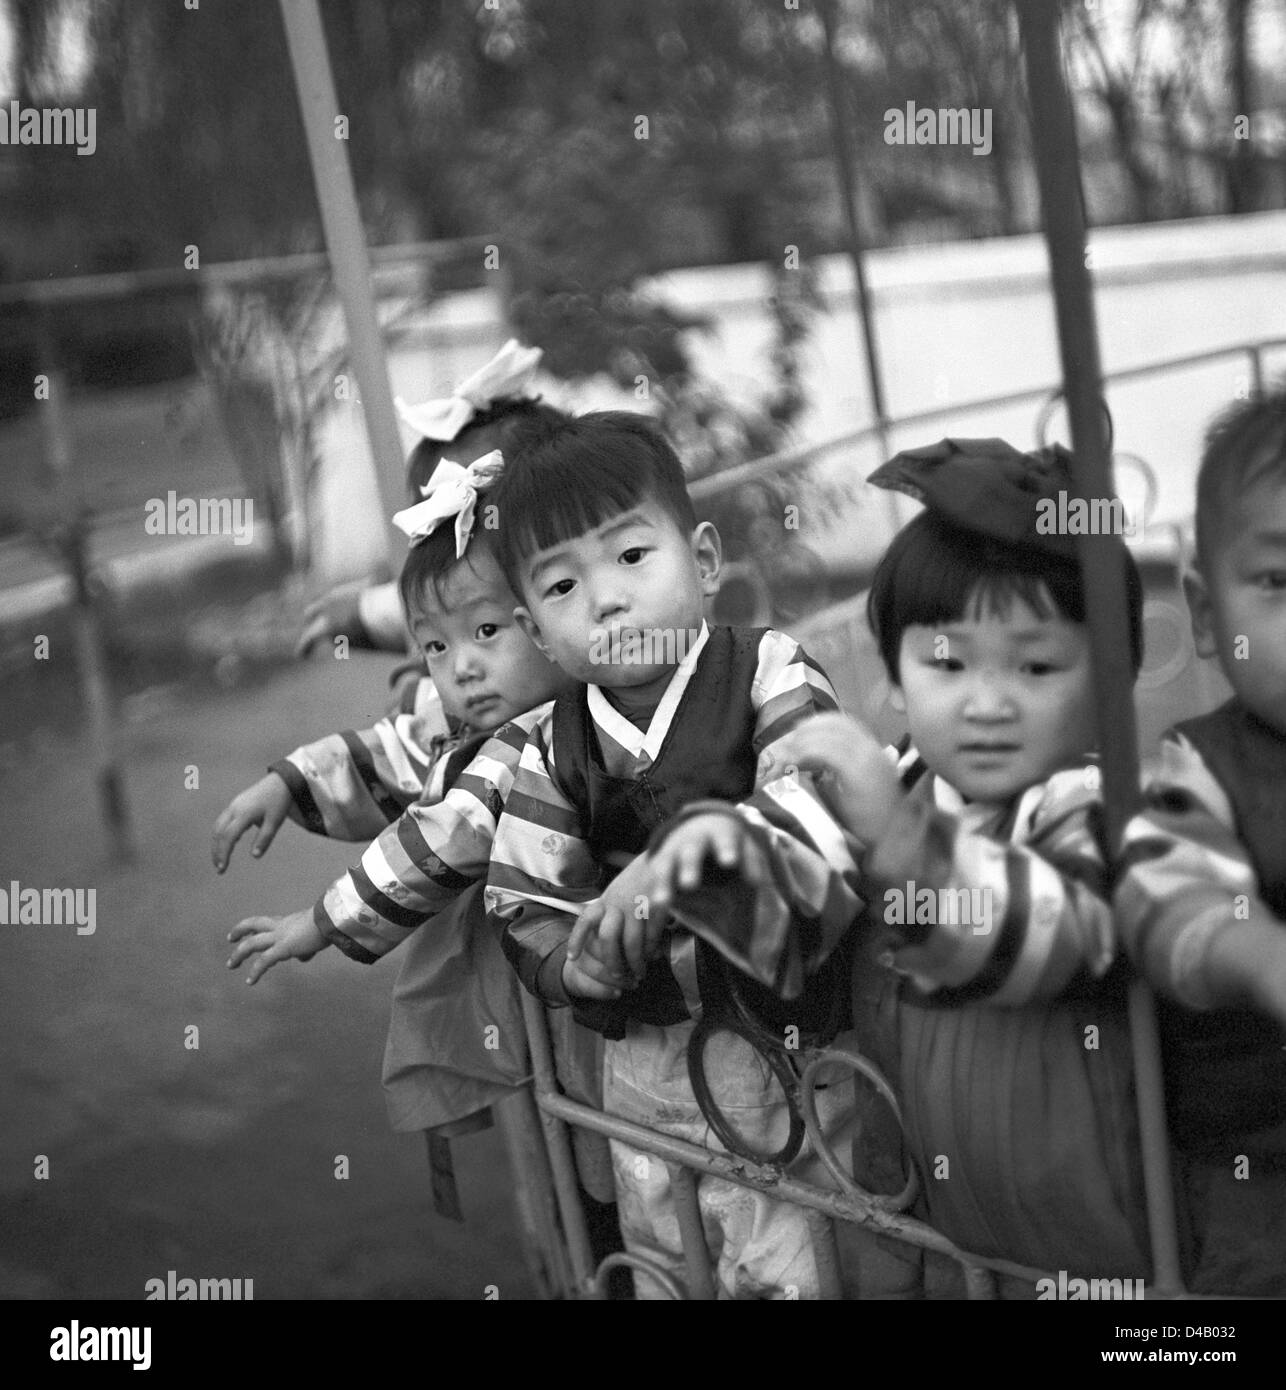 Children stand in a carousel on a playground in a kindergarten in Pyongyang, the capital of the Korean Democratic People's Republic, photographed on the 1st of November in 1971.     Photo: ddrbildarchiv.de / Klaus Morgenstern - GESPERRT FÜR BILDFUNK Stock Photo